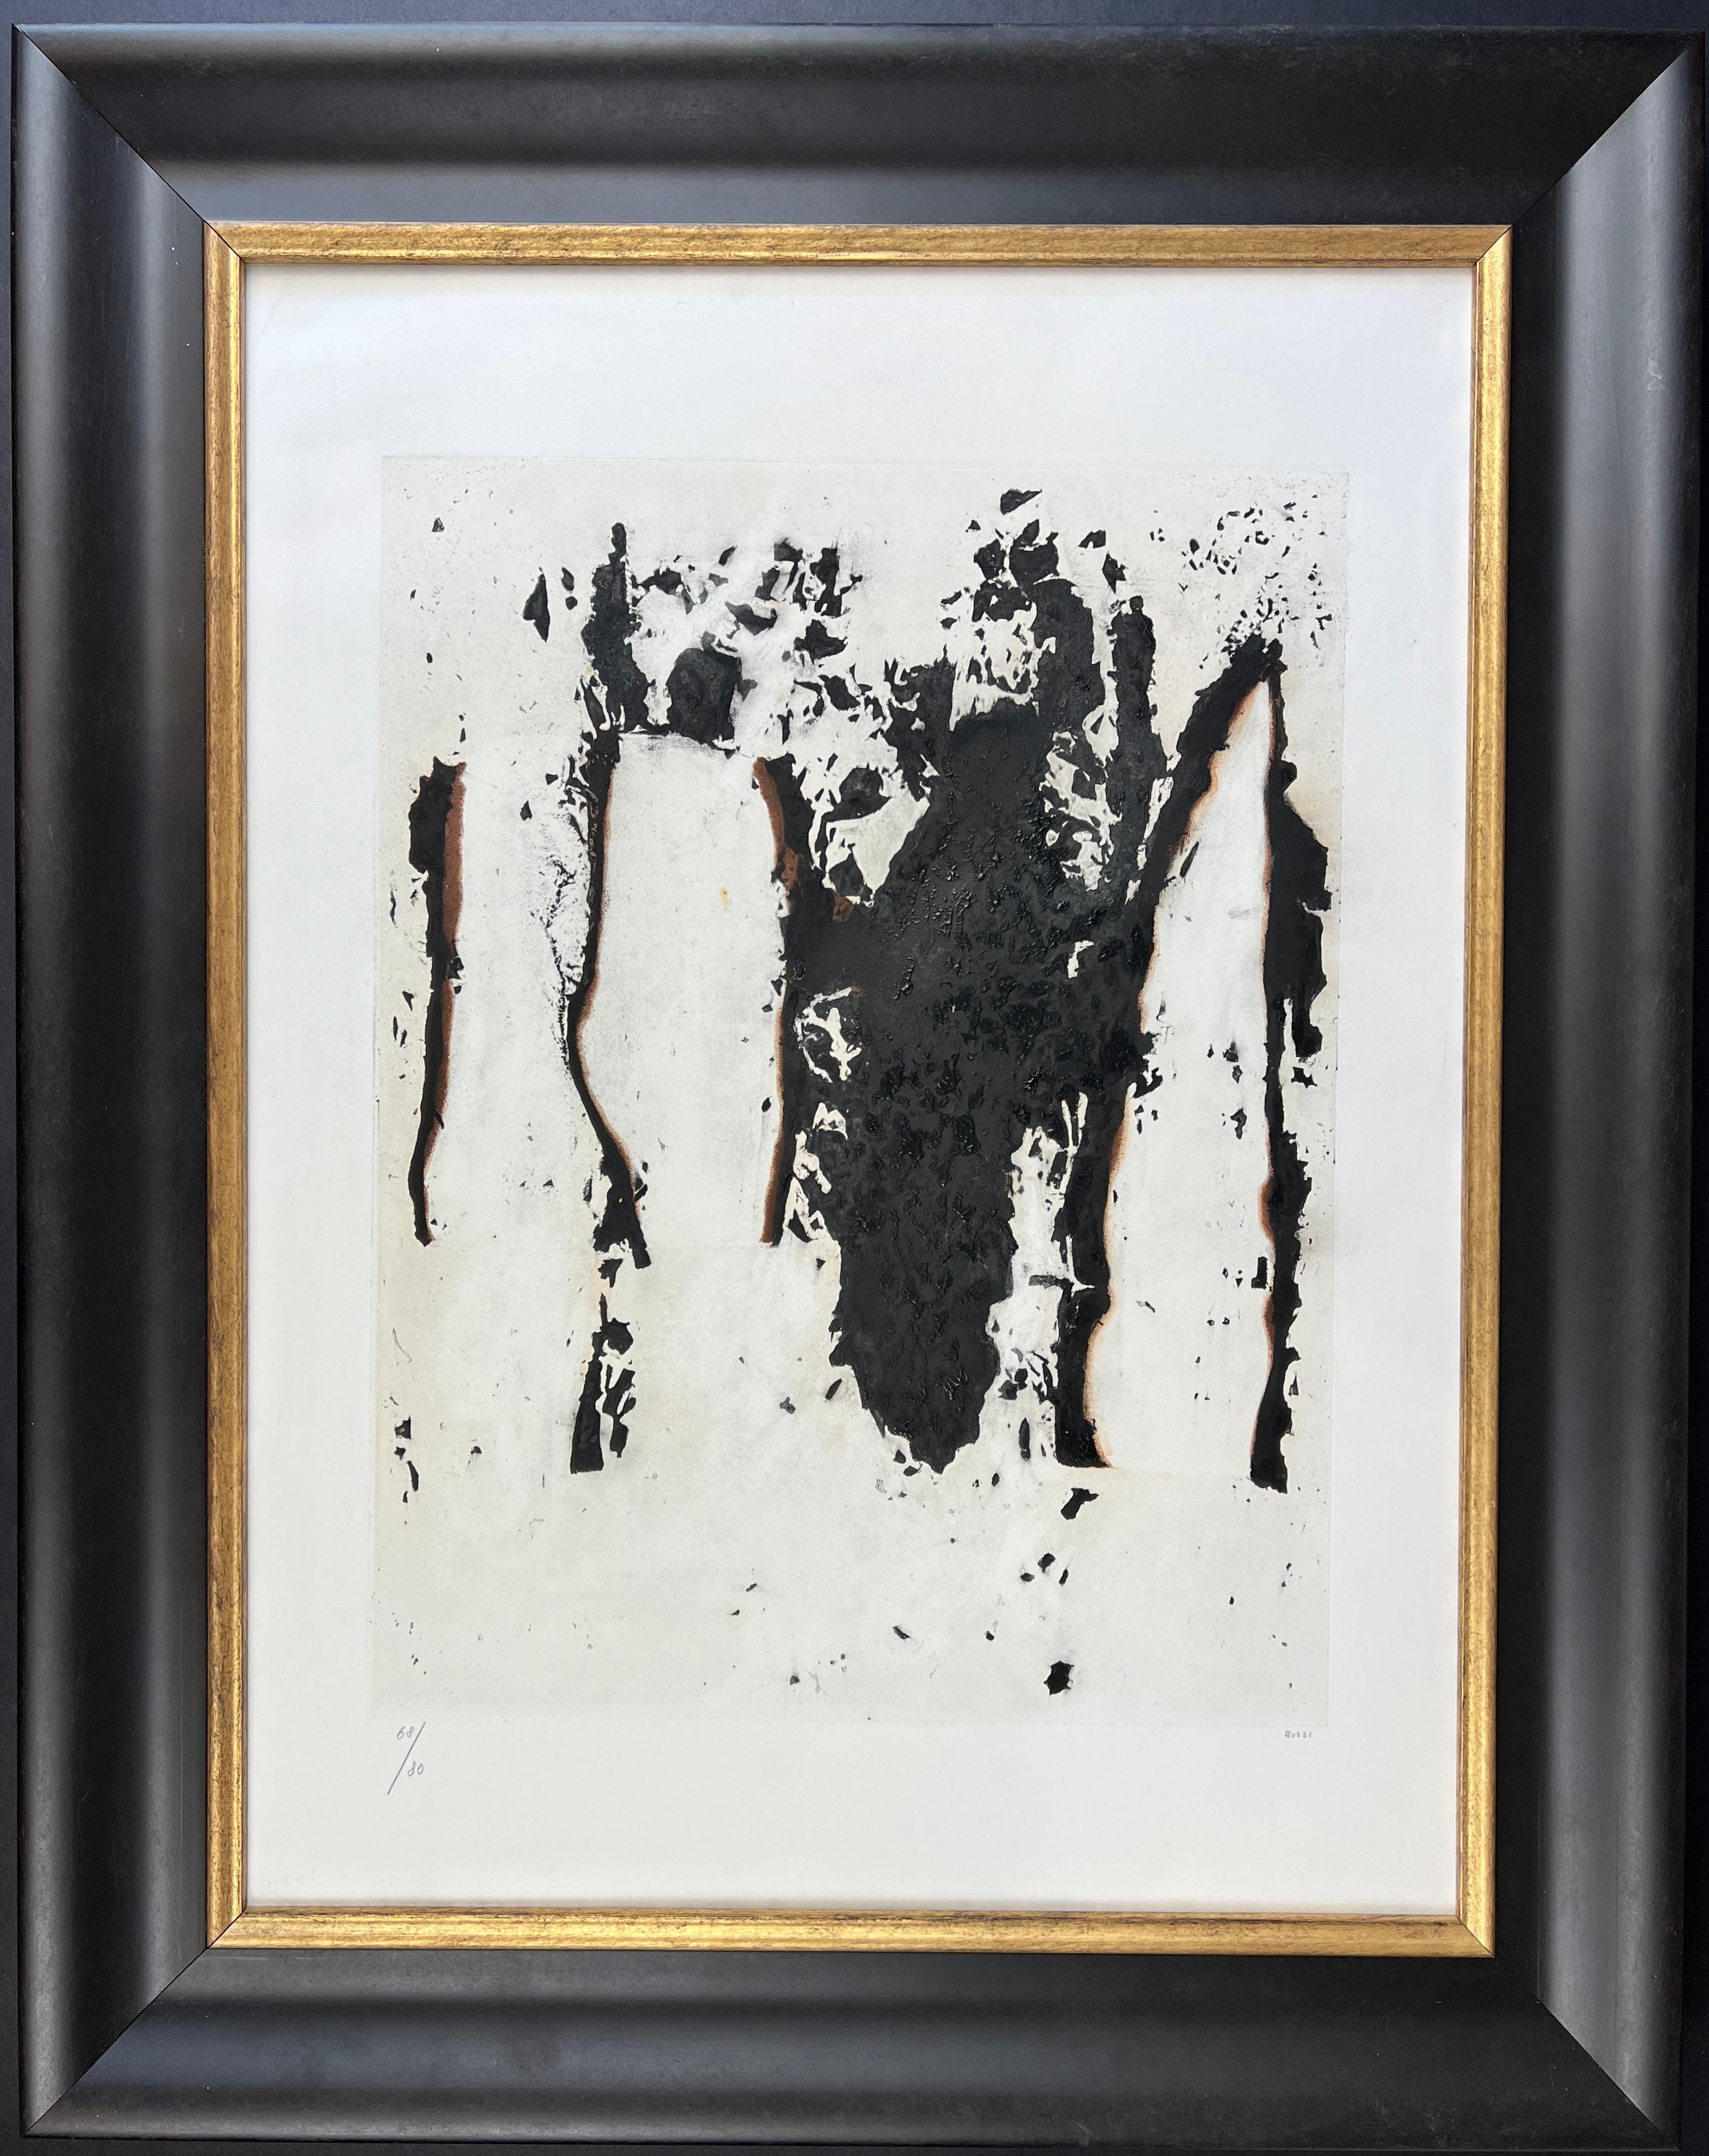 A rare edition work from “COMBUSTIONI” series,
dating back to the mid-60s.
Comes from a folder of 6 etchings and aquatints on Fabriano paper edited in 1965 by 2RC and Marlborough Gallery in Rome
limited edition in 80 copies in cardinal numbers and